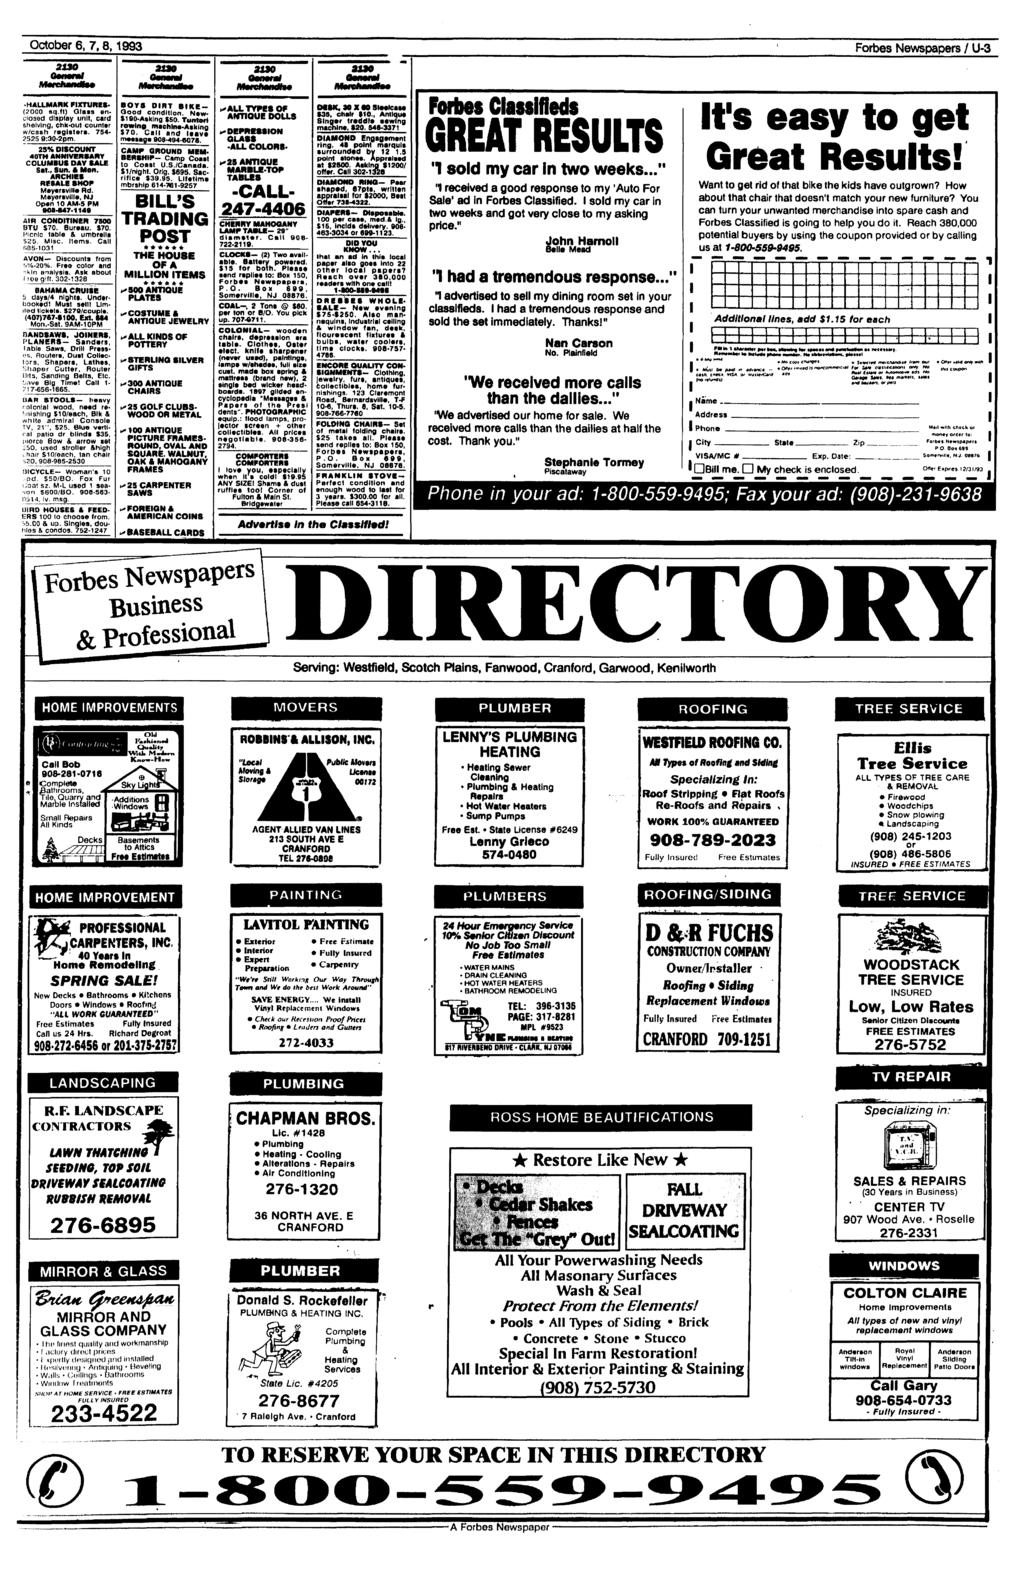 October 6, 7,8,1993 Forbes Newspapers / U-3 asso 2130 2190 31*0 HALLMARK FIXTURES' (2000 sq.lt) Glais enclosed display unit, card shelving, chk-out counter w/cash register*. 754-2525 9:30-2pm.